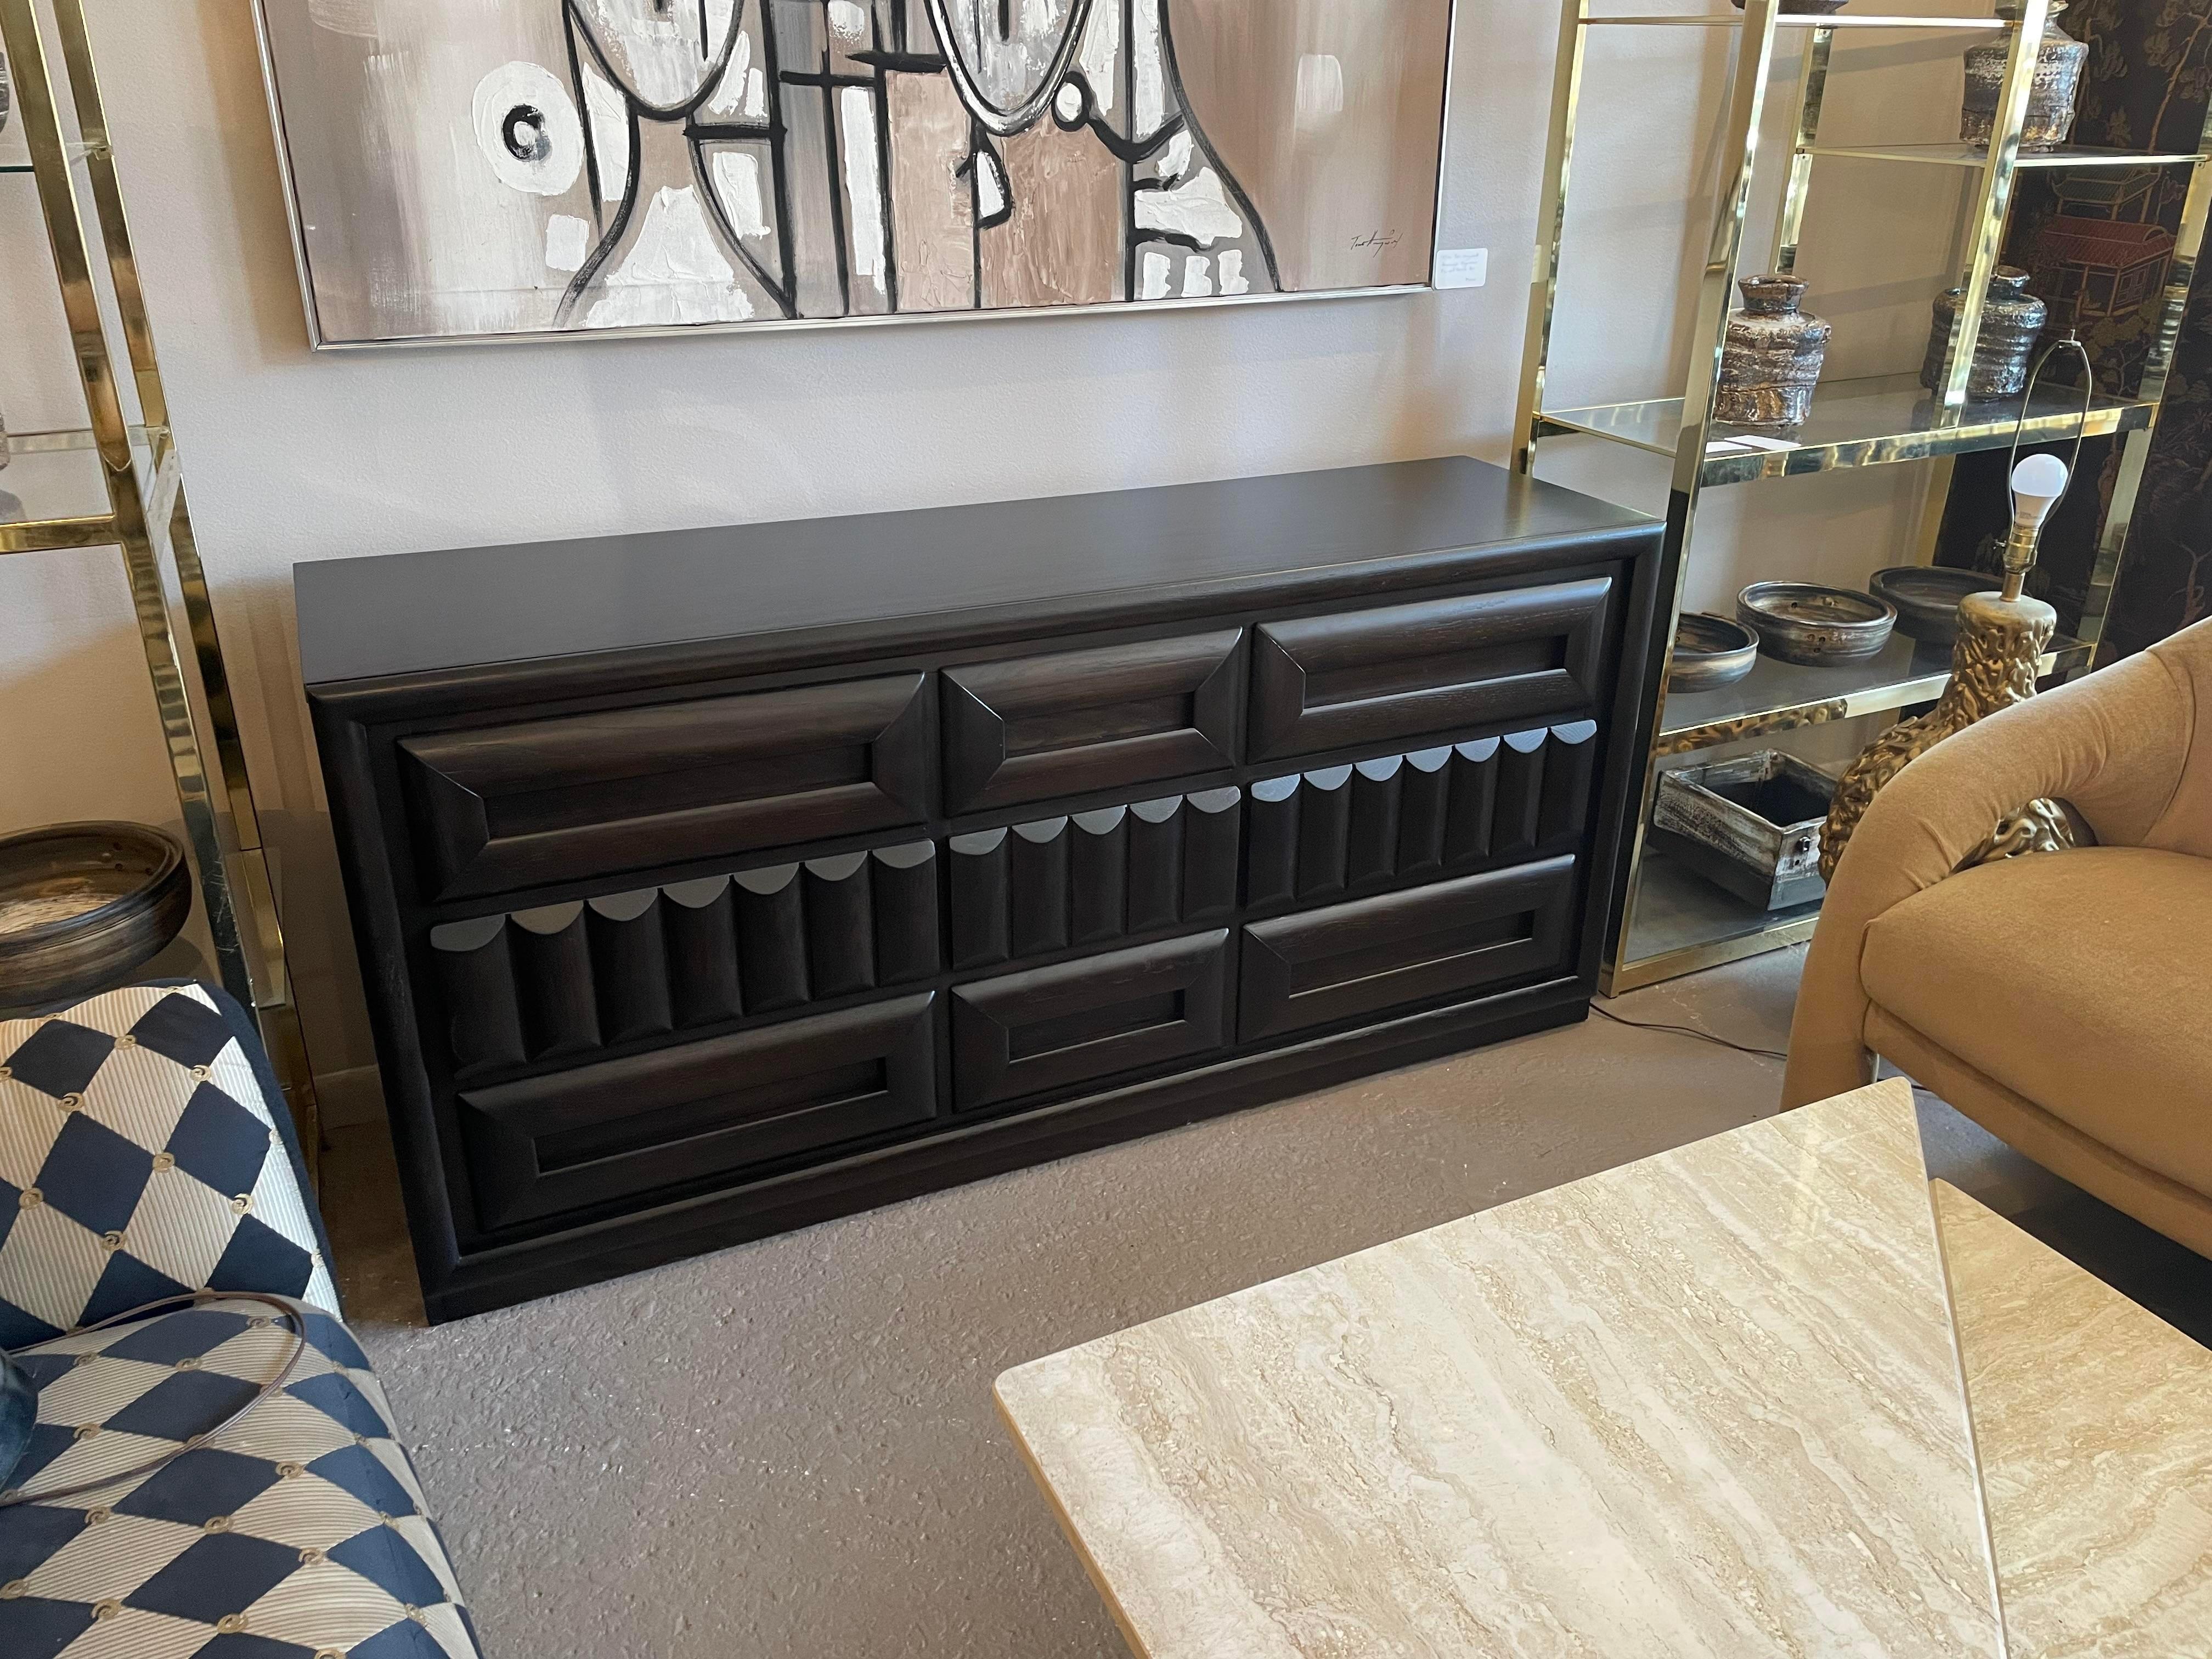 Absolutely love this. We refinished this piece to a very dark brown/almost black stain. All of the drawers open easily.
 